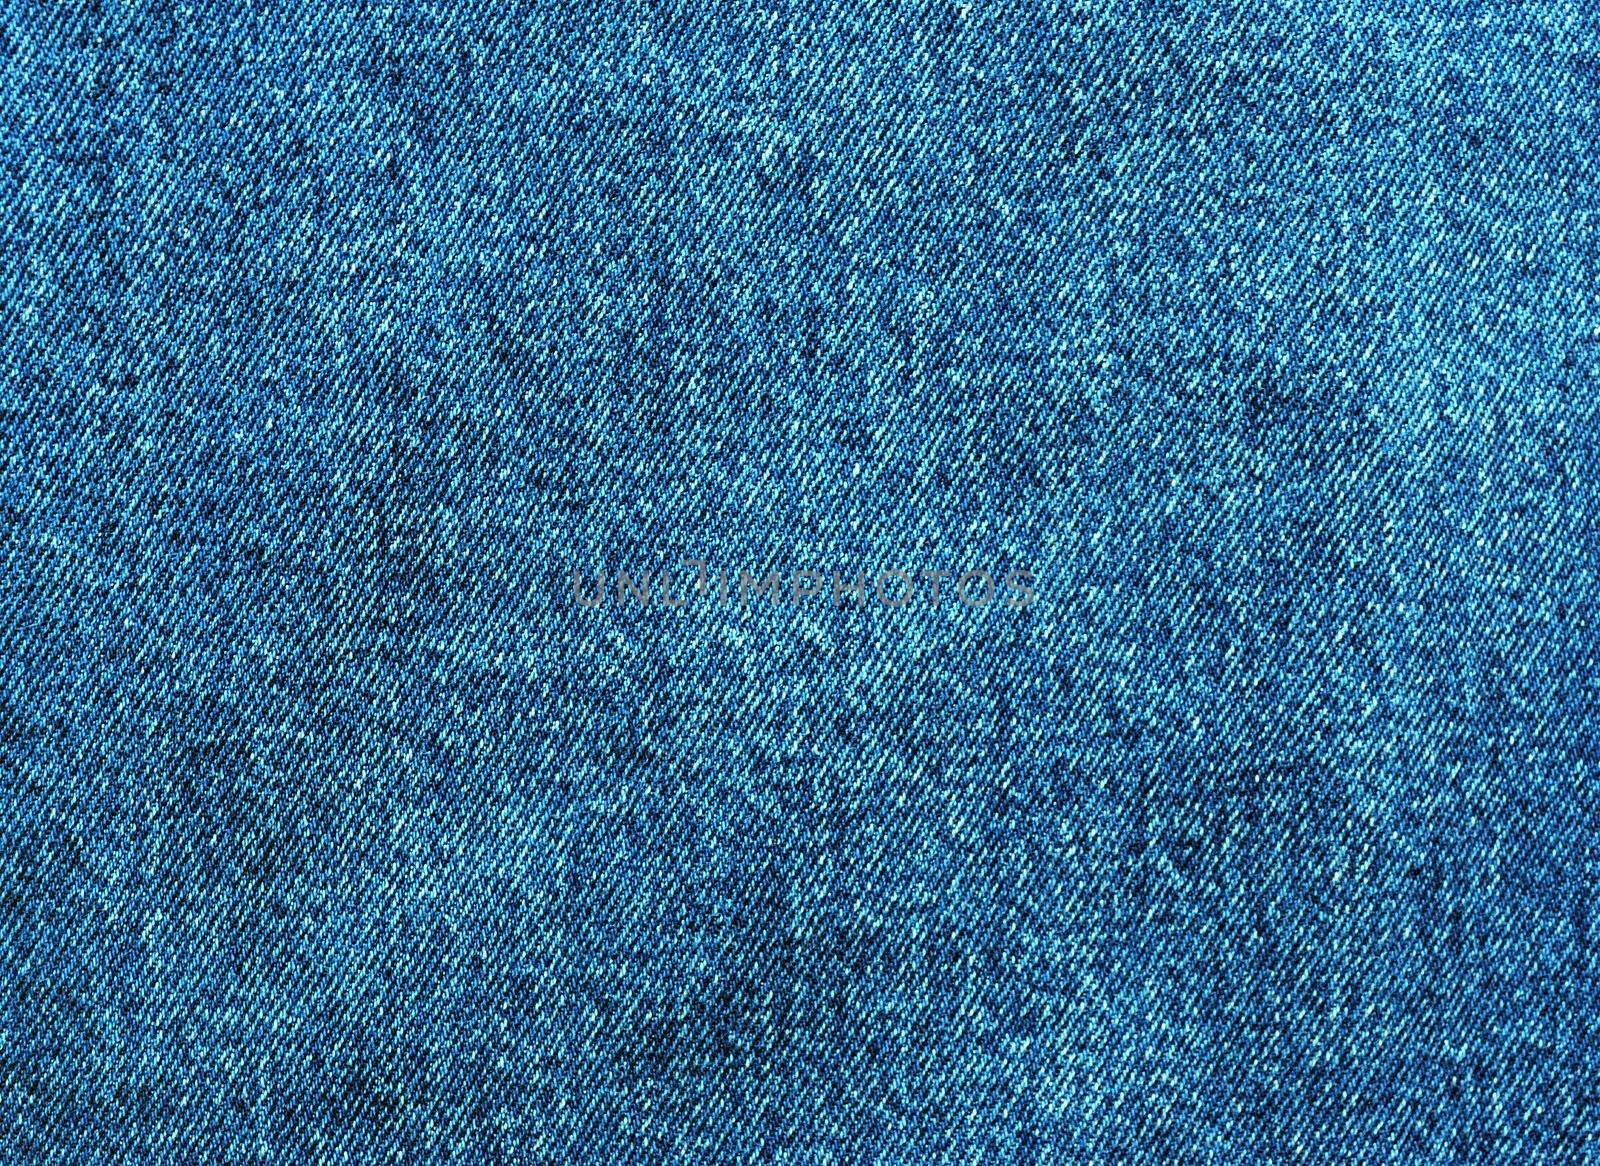 texture of blue cotton by Sergieiev